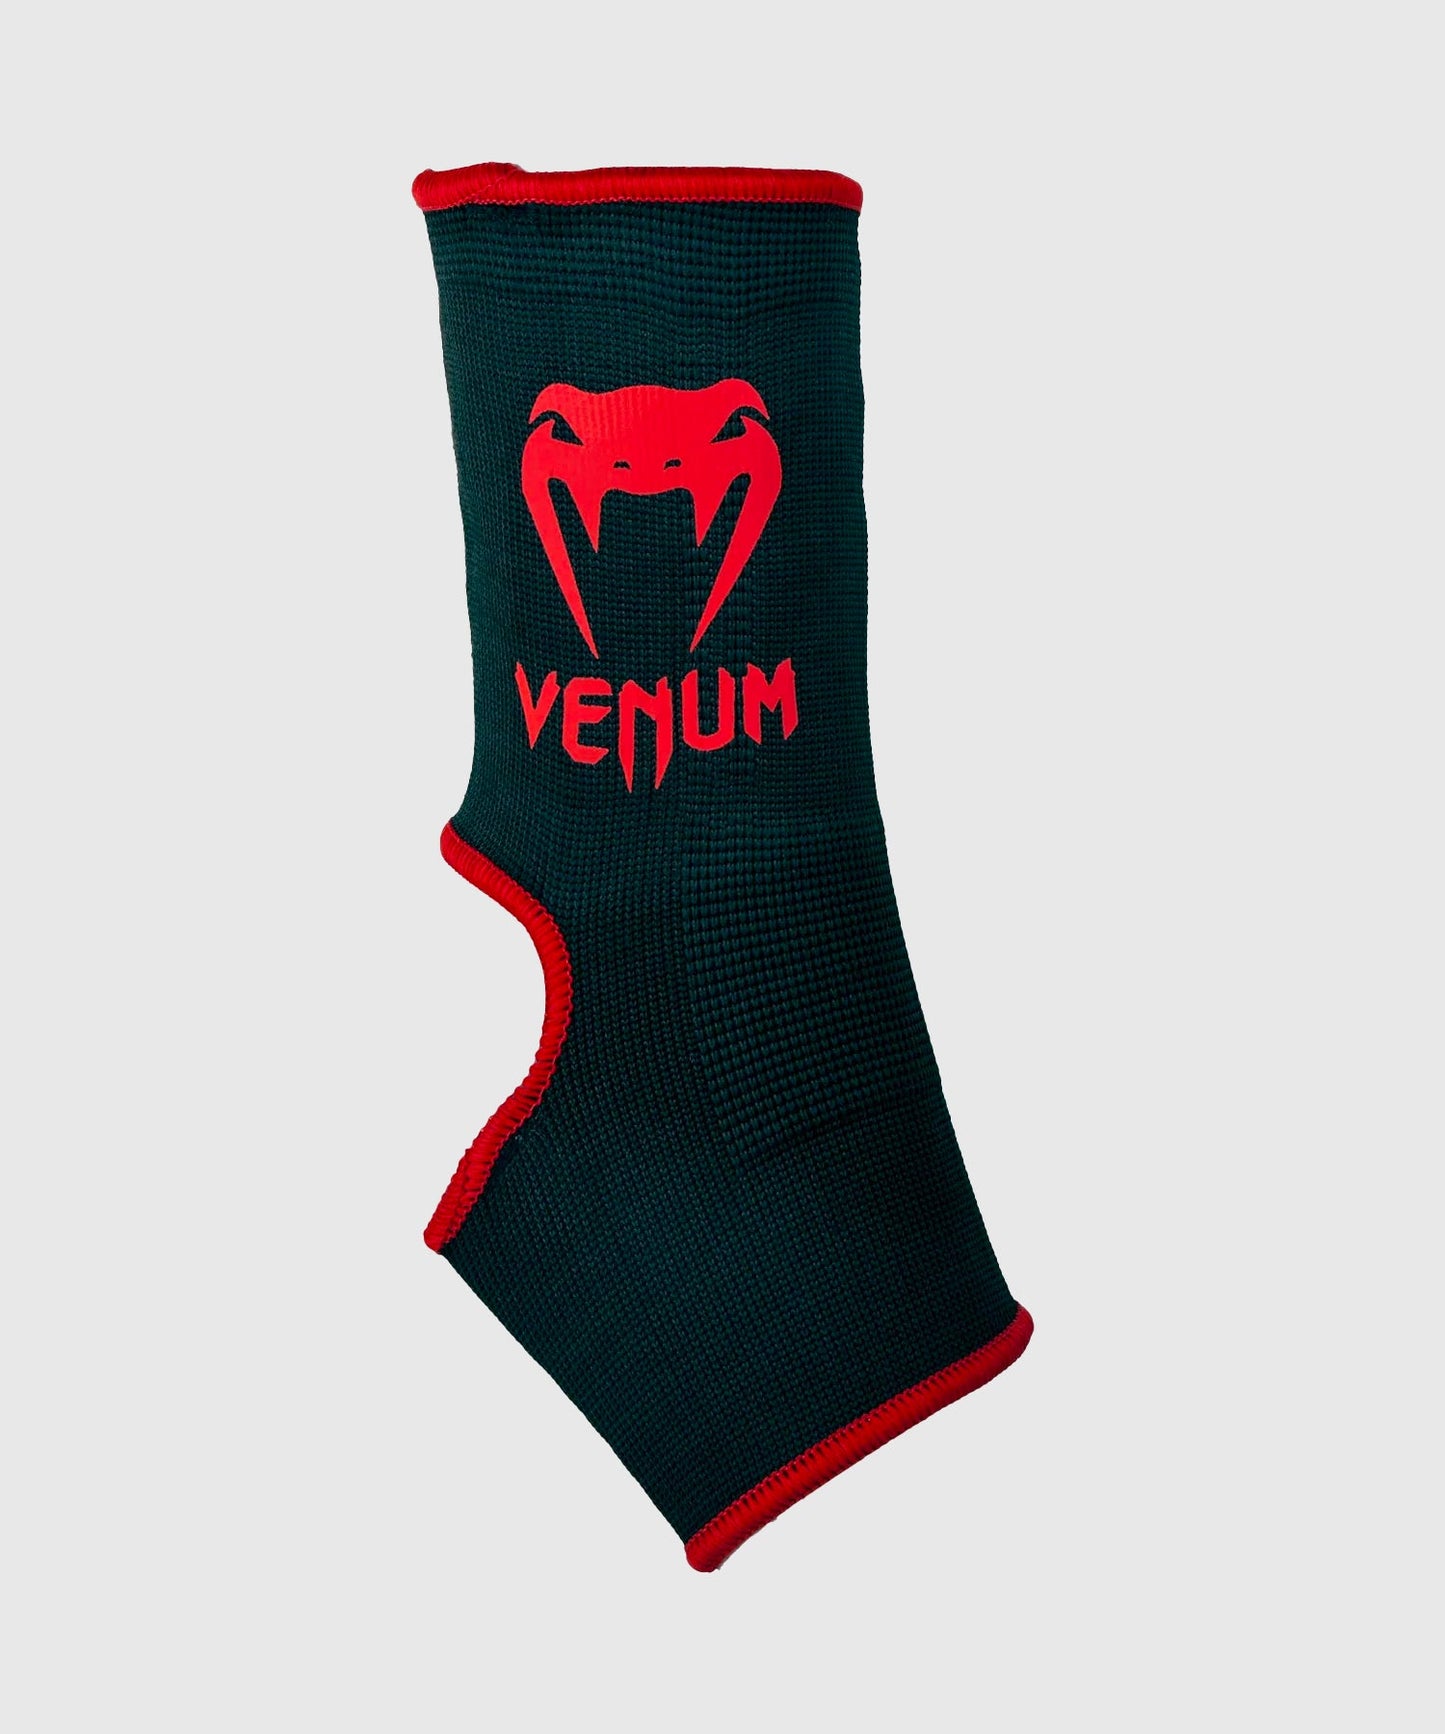 Venum Kontact Ankle Support Guards - Black/Red